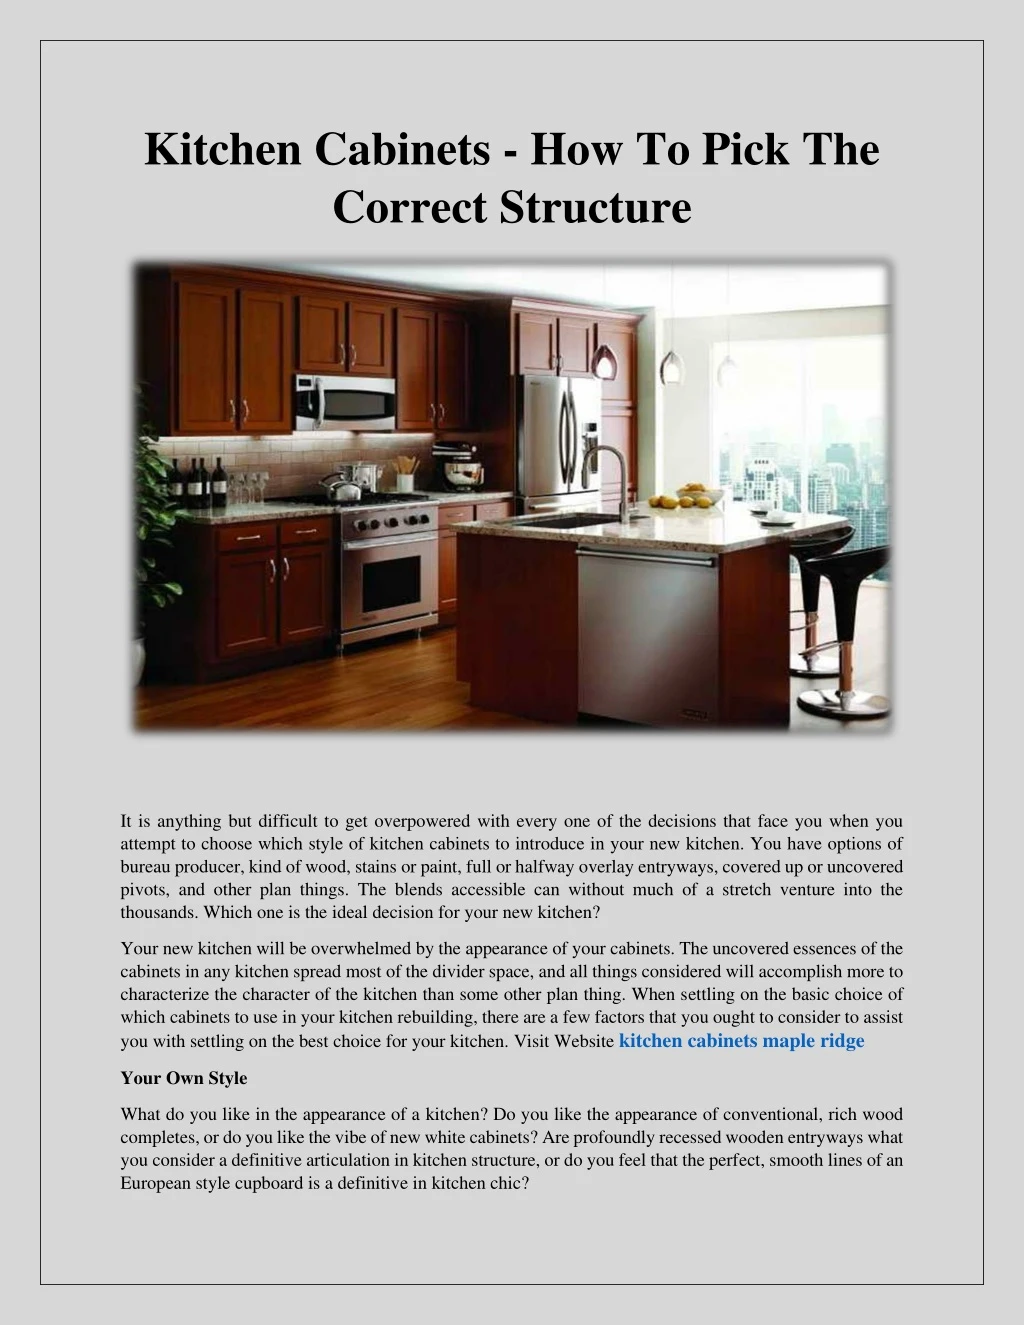 kitchen cabinets how to pick the correct structure